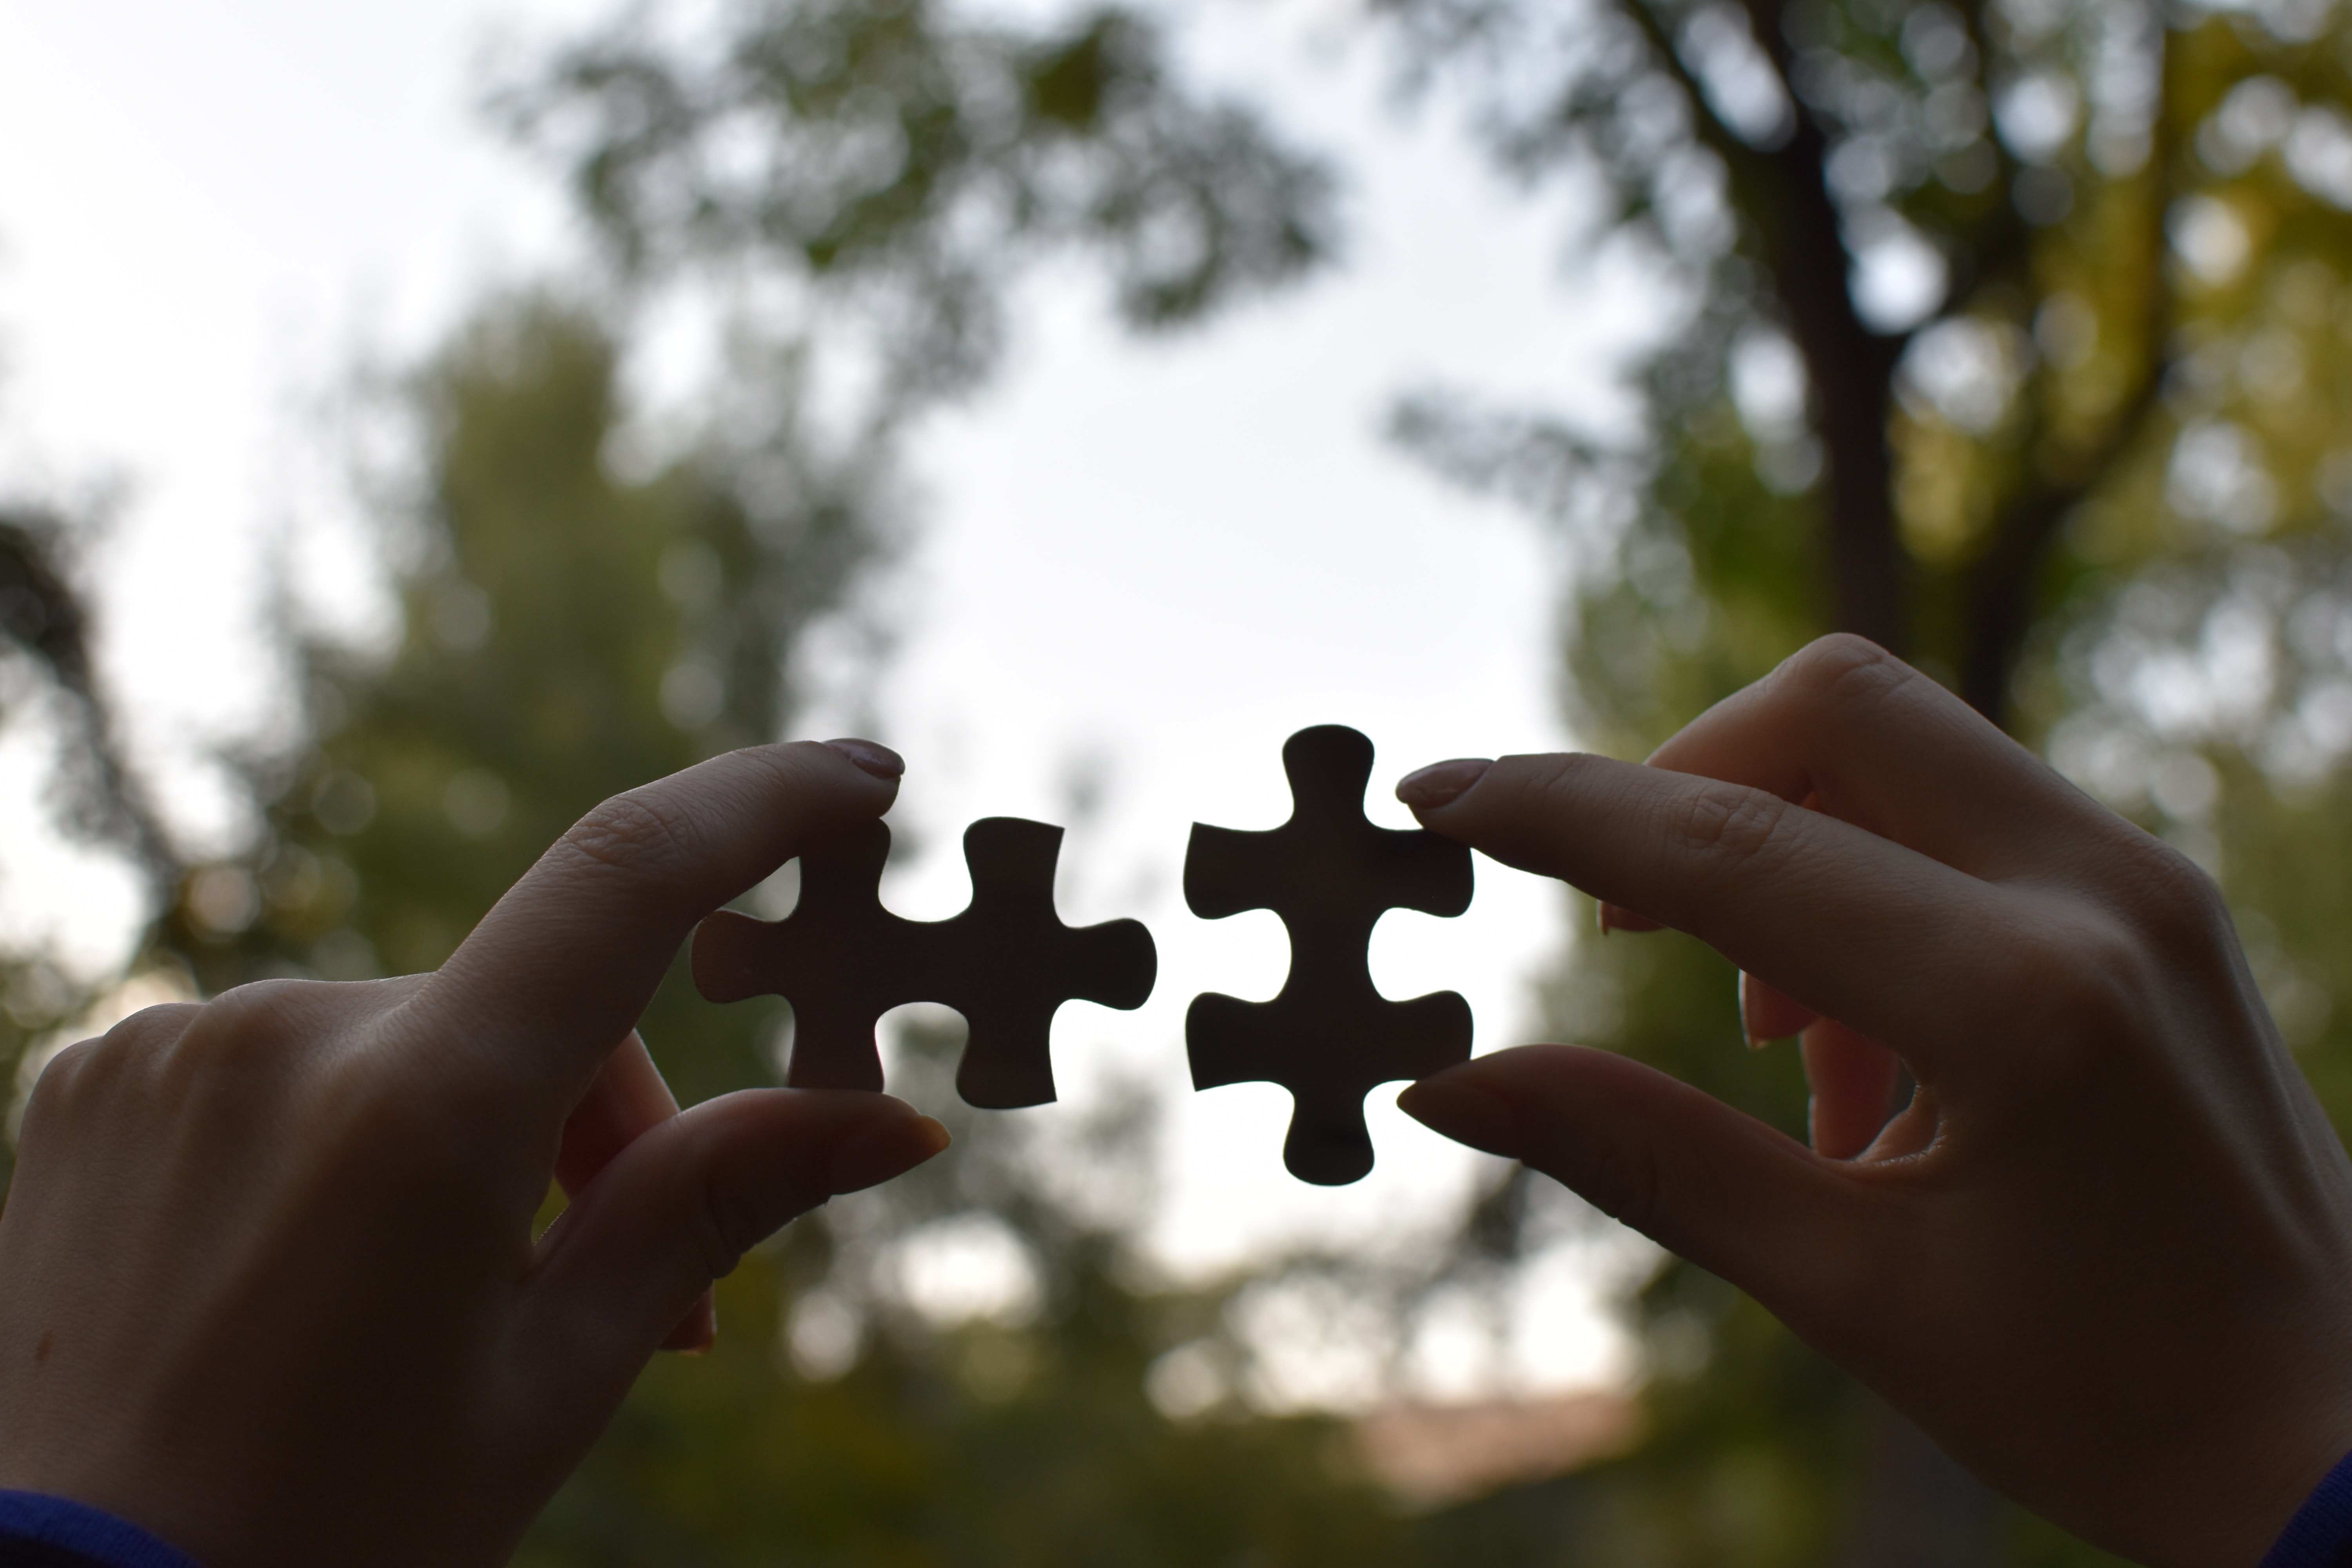 Hands holding up two jigsaw pieces to the light. Trees can be seen, blurred, in the background.